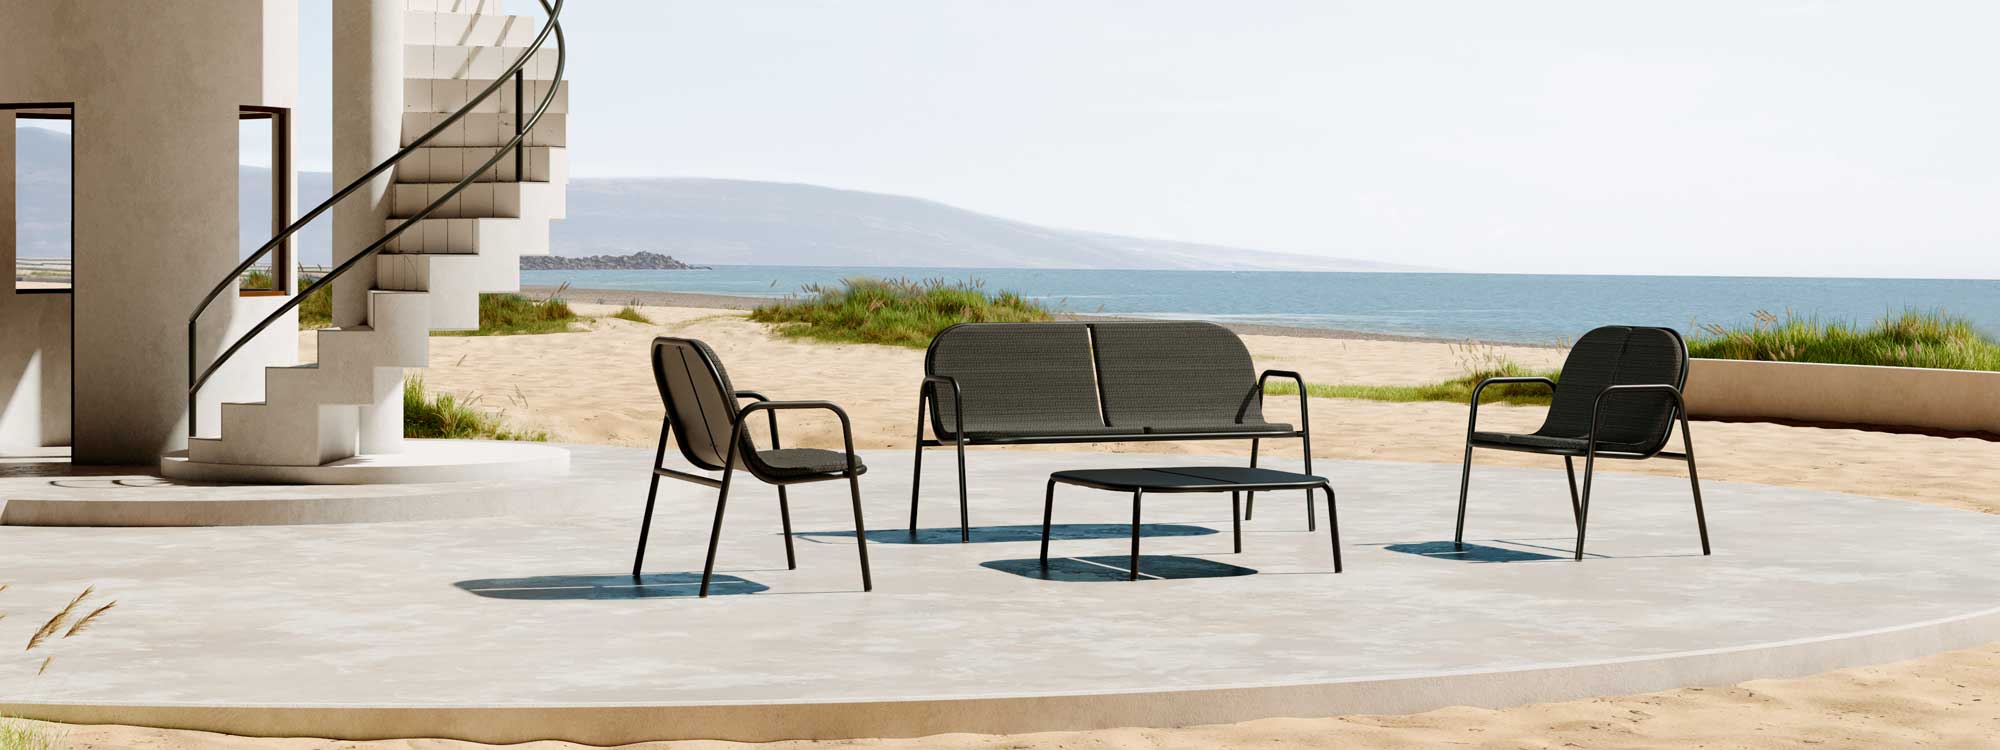 Image of Oiside Parc stacking contemporary outdoor lounge furniture on sunny terrace next to spiral staircase with sand dunes and sea in the background